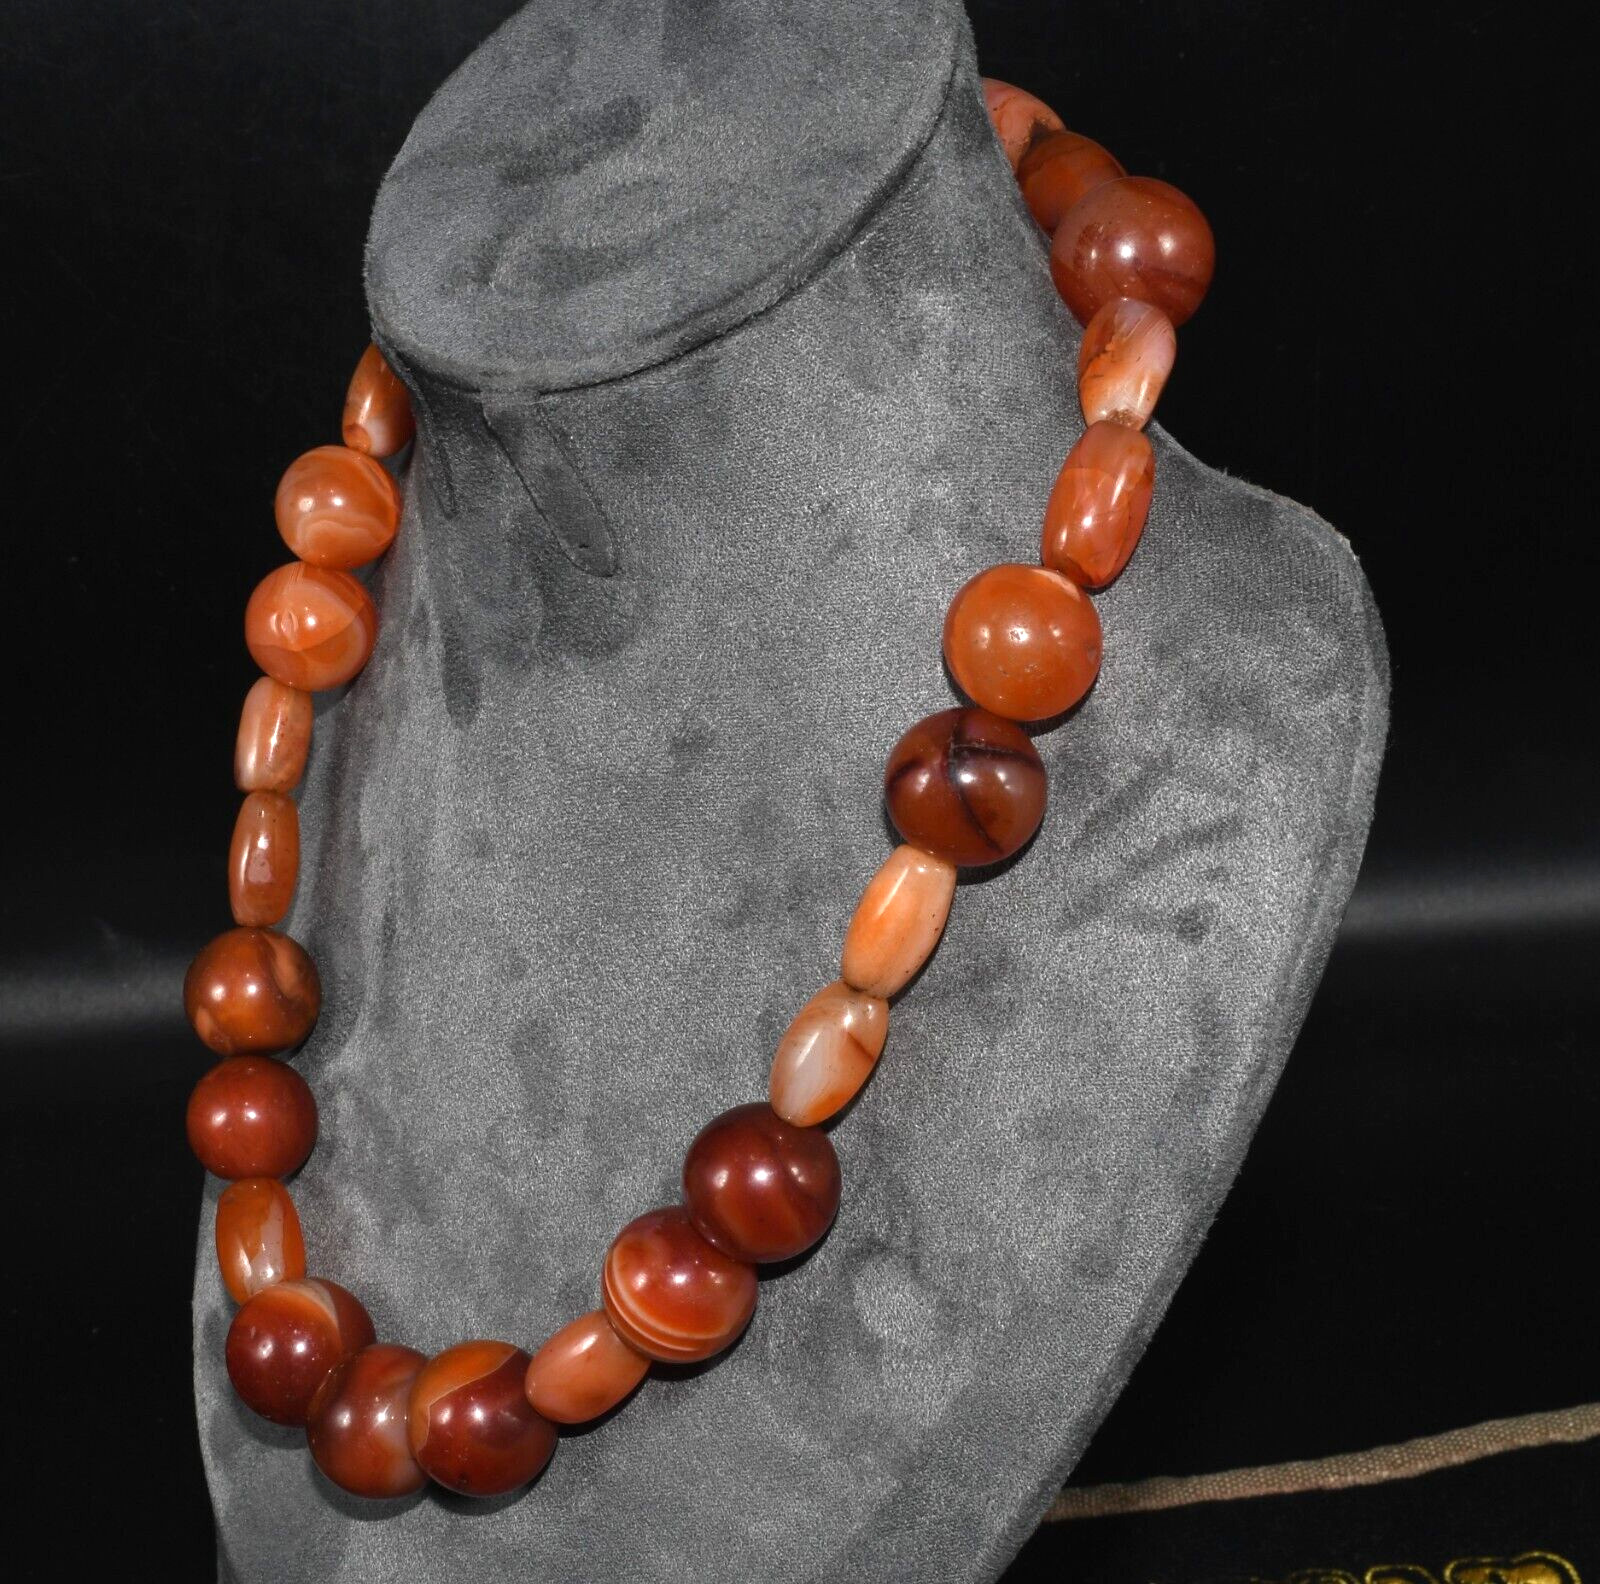 Large Ancient Yemani Carnelian Stone Bead Necklace from Middle East